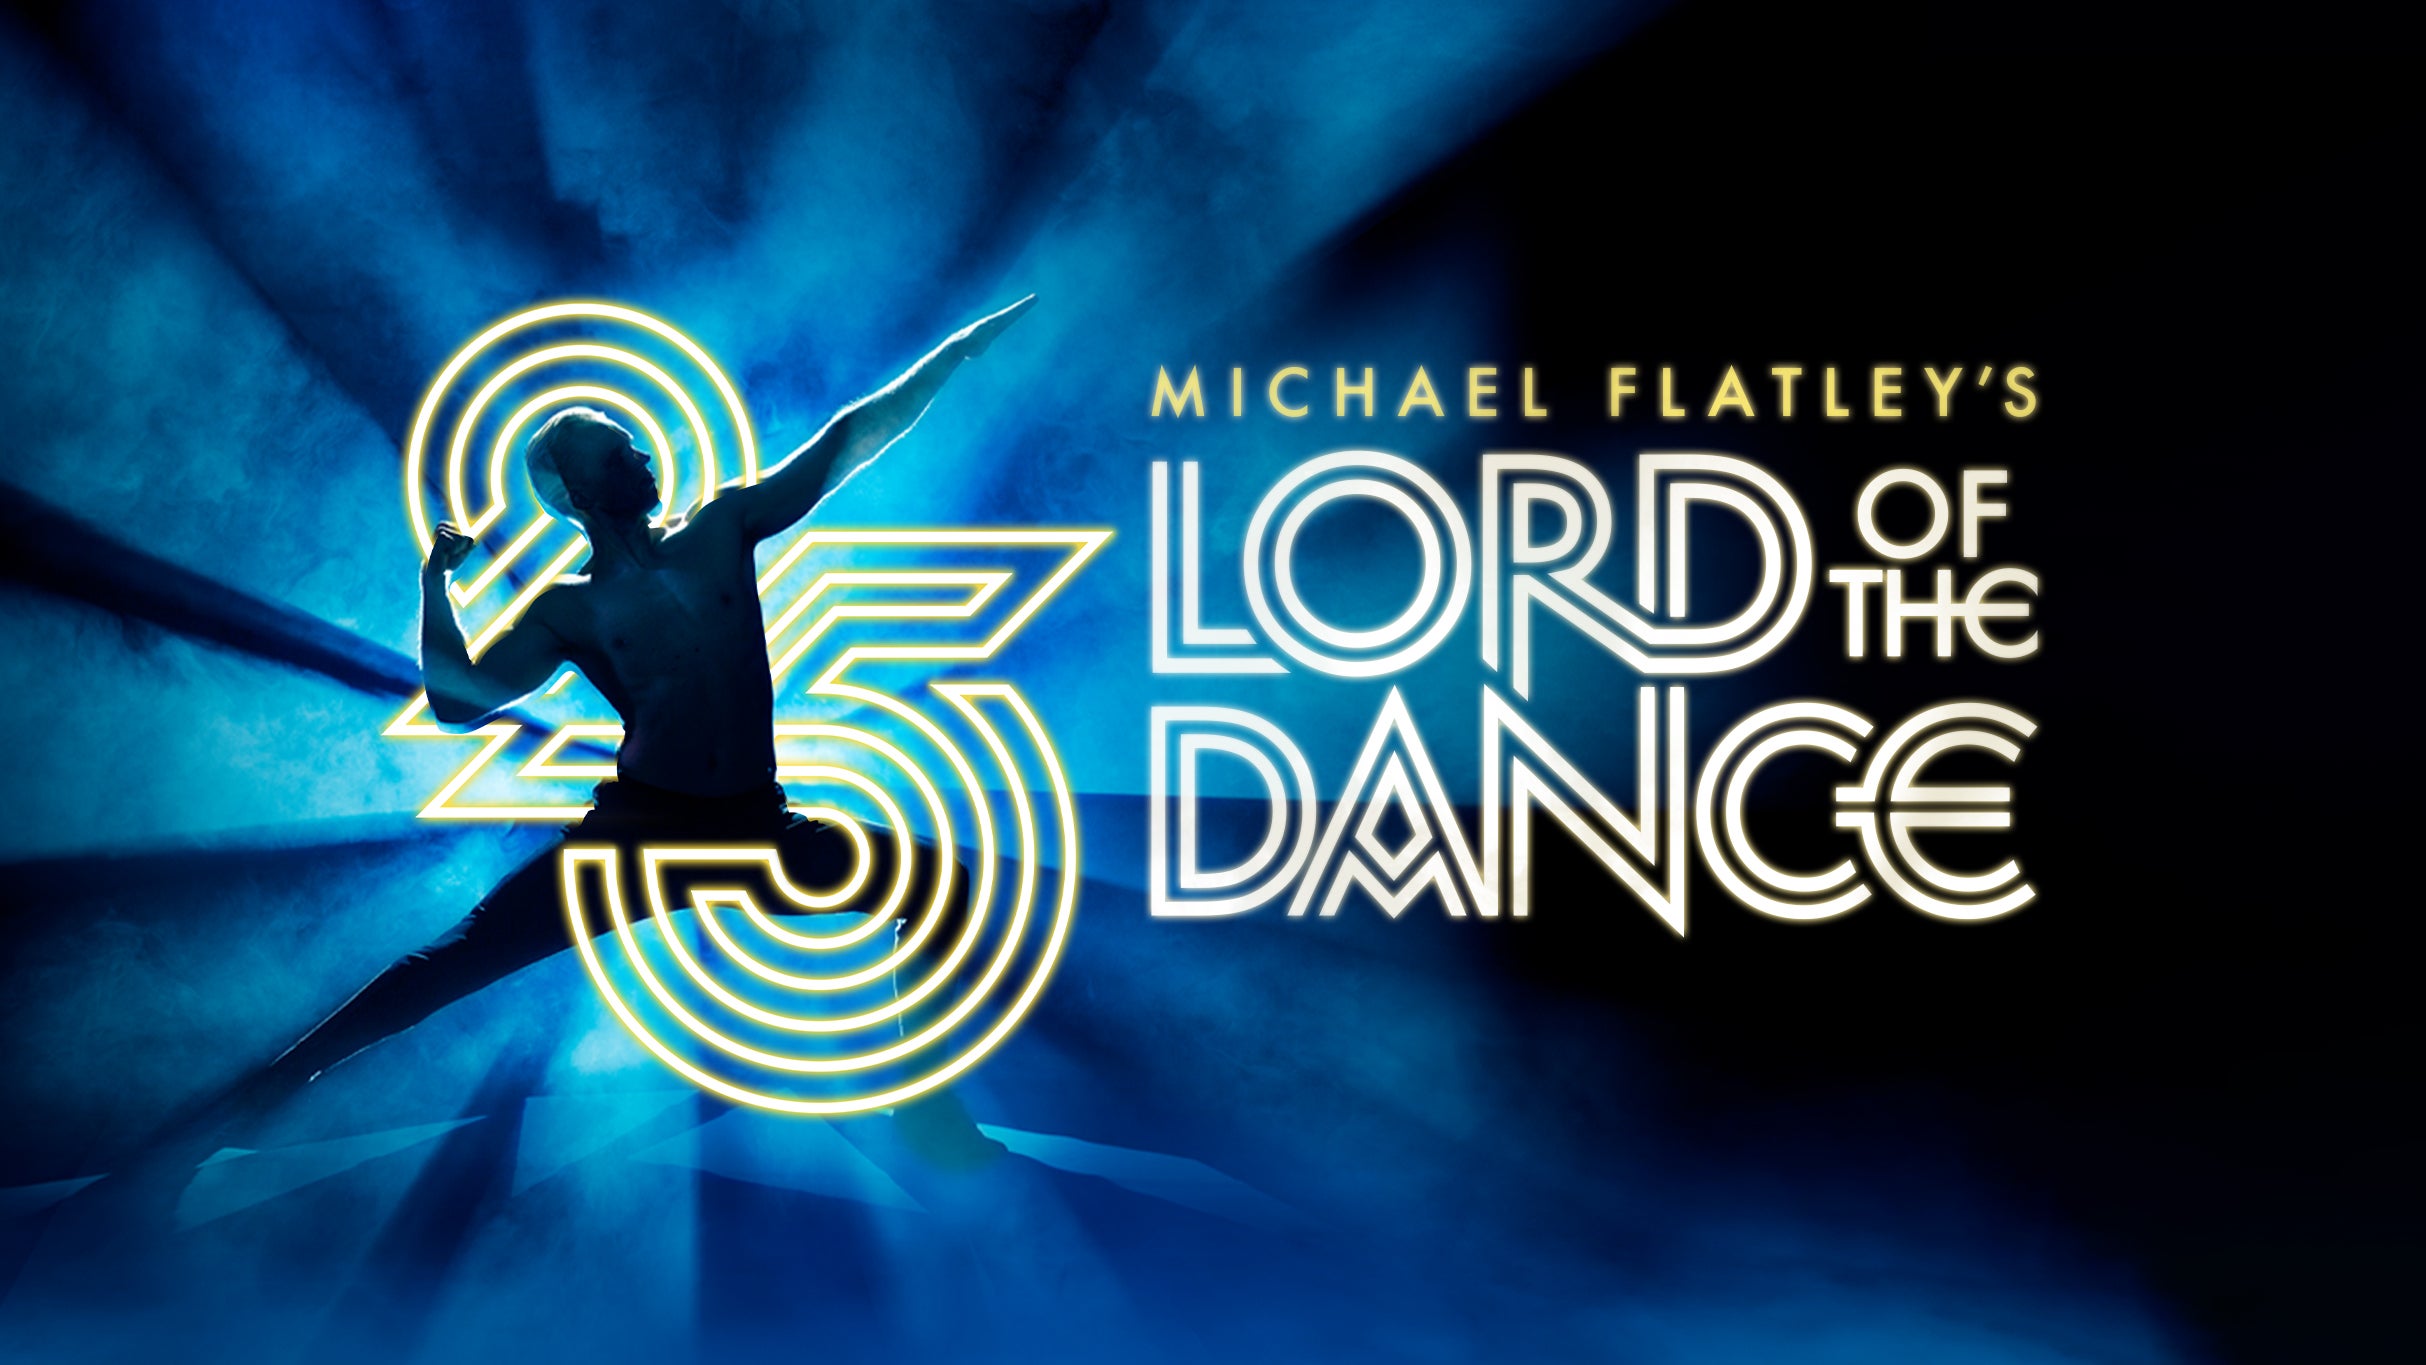 Michael Flatley’s Lord Of The Dance – 25th Anniversary Tour